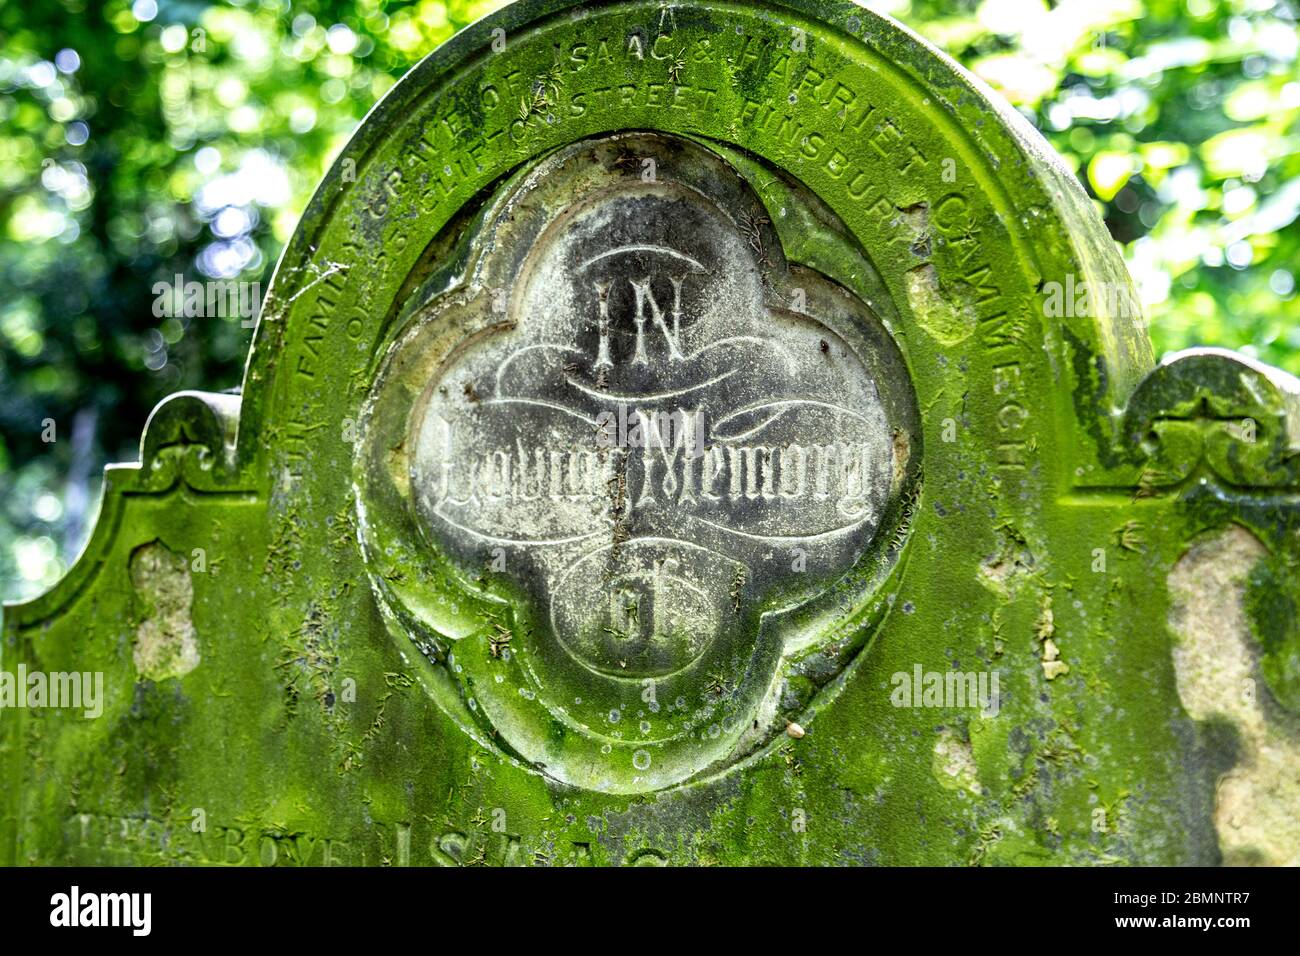 Close-up of ornate headstone saying 'In Loving Memory' at Tower Hamlets Cemetery Park, London, UK Stock Photo